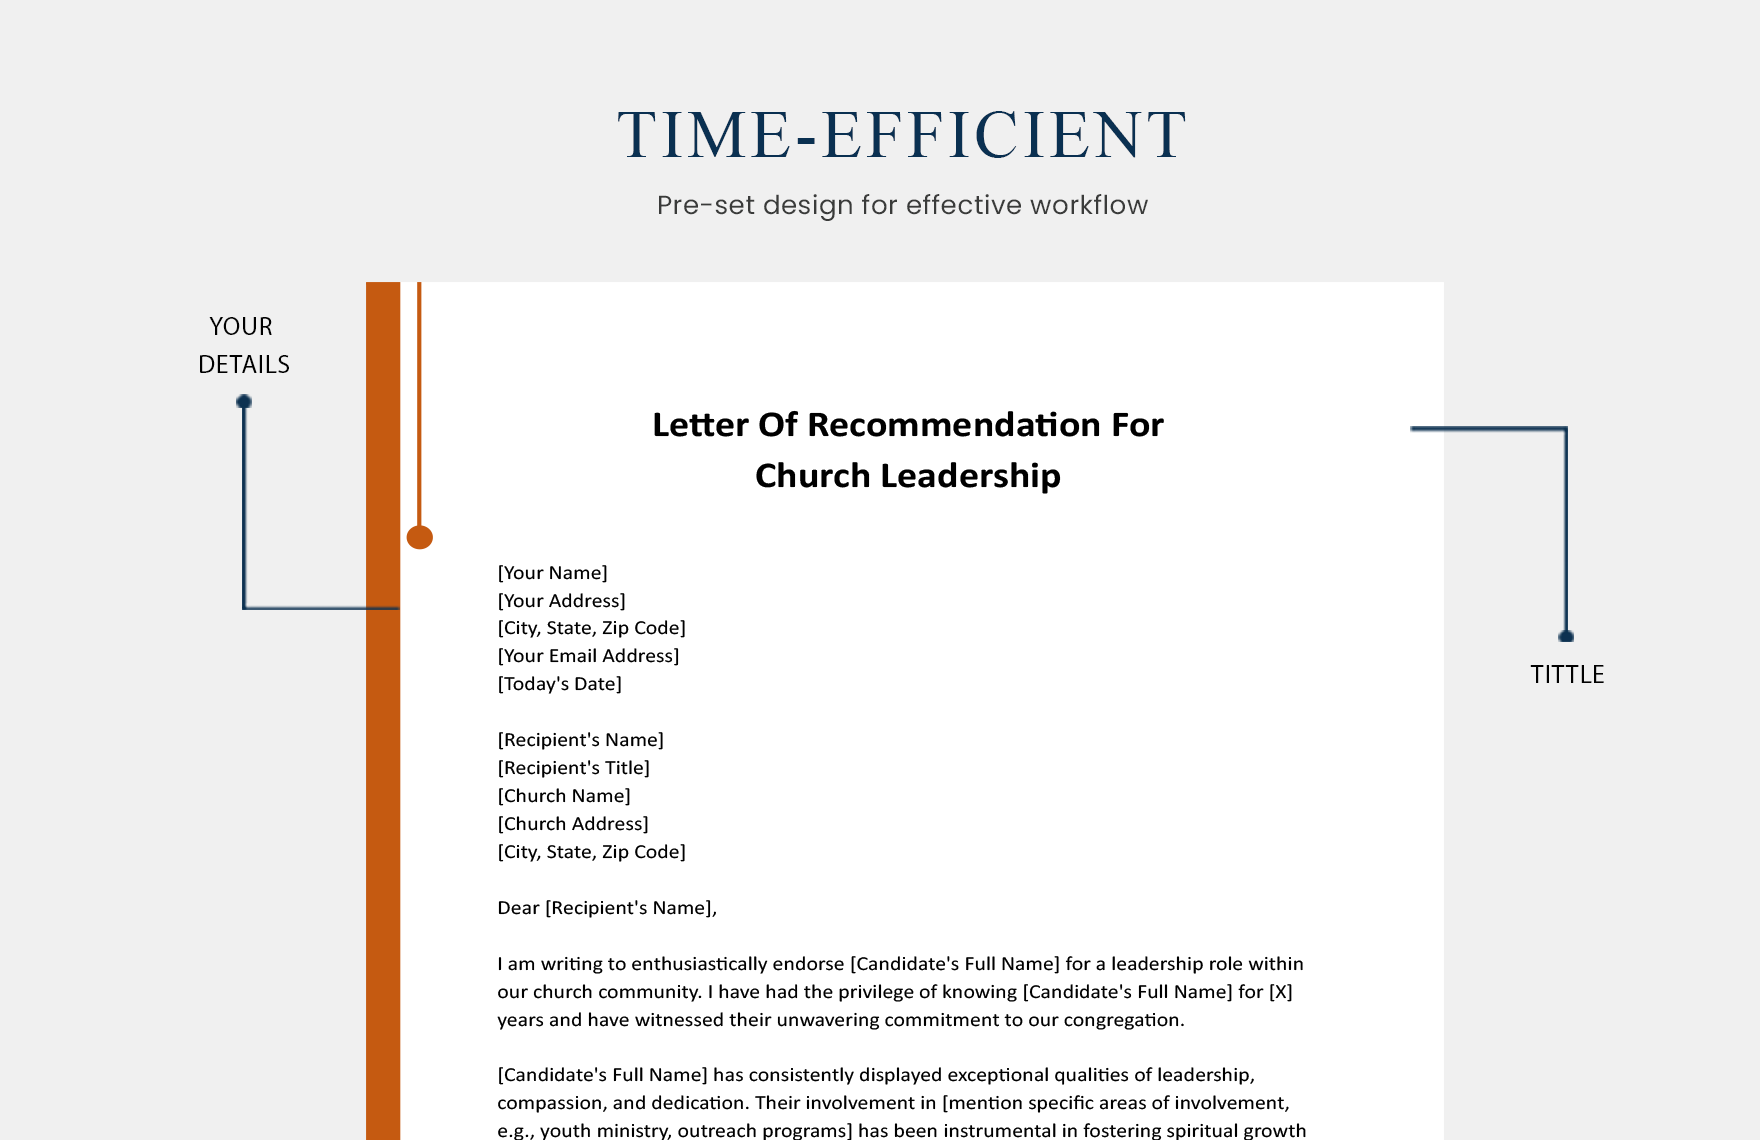 Letter Of Recommendation For Church Leadership